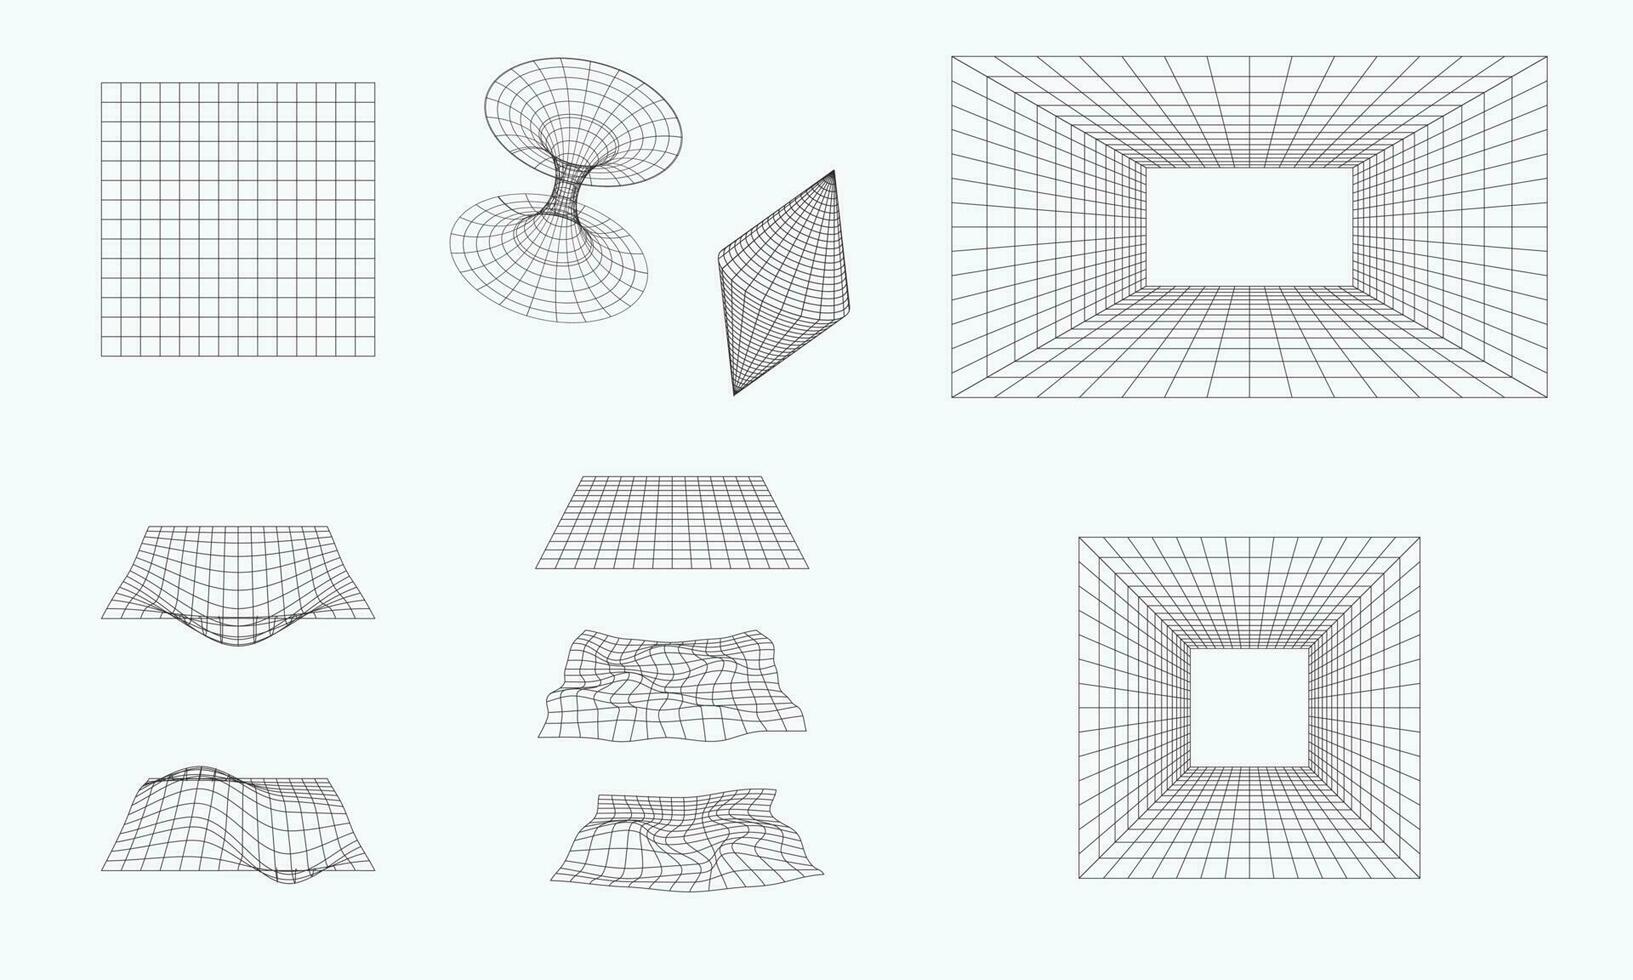 3D geometry wireframe shapes and grids on white background. Retro futuristic design elements. Cyberpunk elements in trendy psychedelic rave style vector